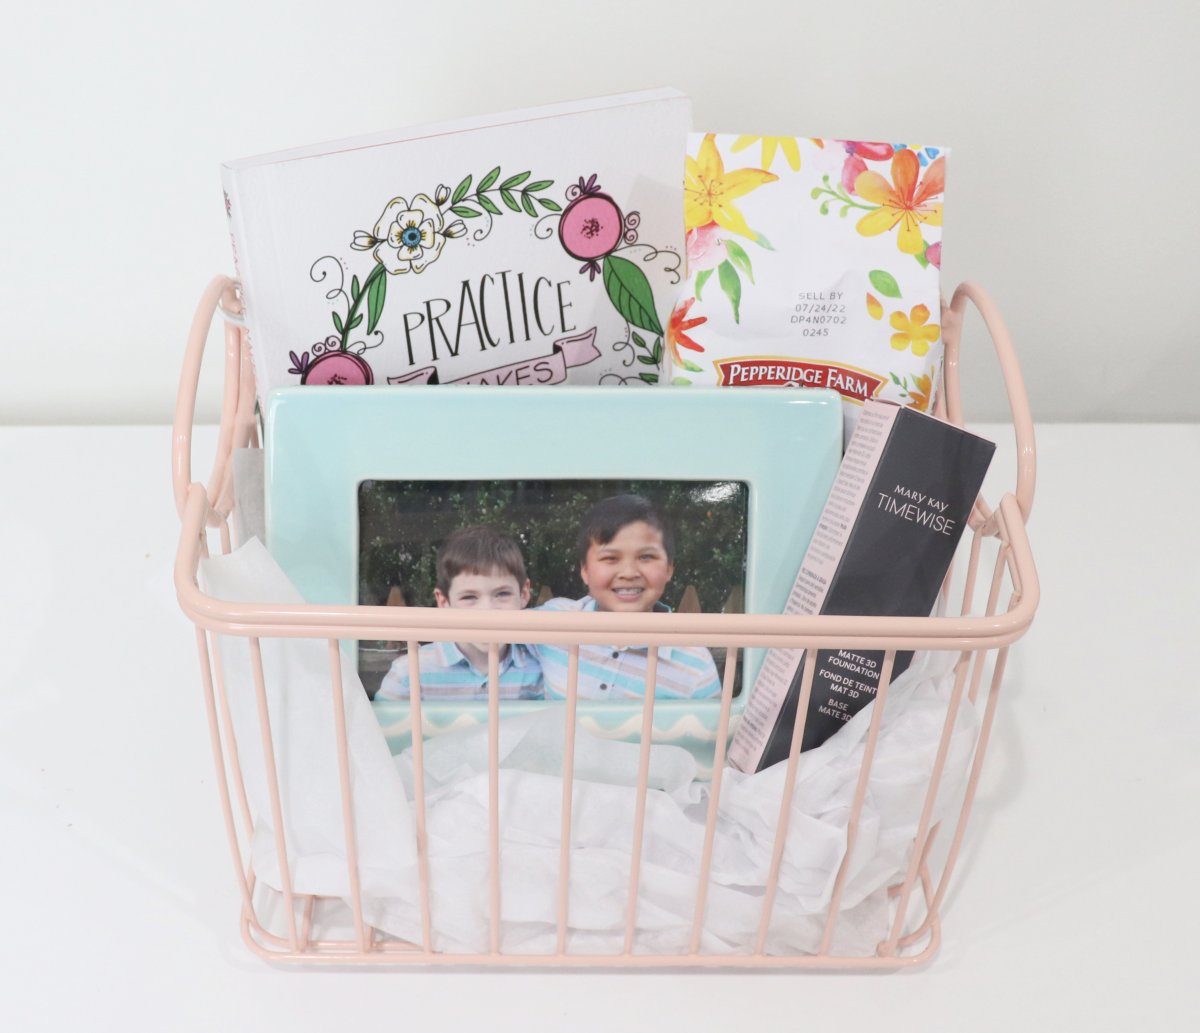 Image contains a pink wire basket holding a journal, a package of cookies, a framed photo of two boys, and a tube of foundation, on a white background.